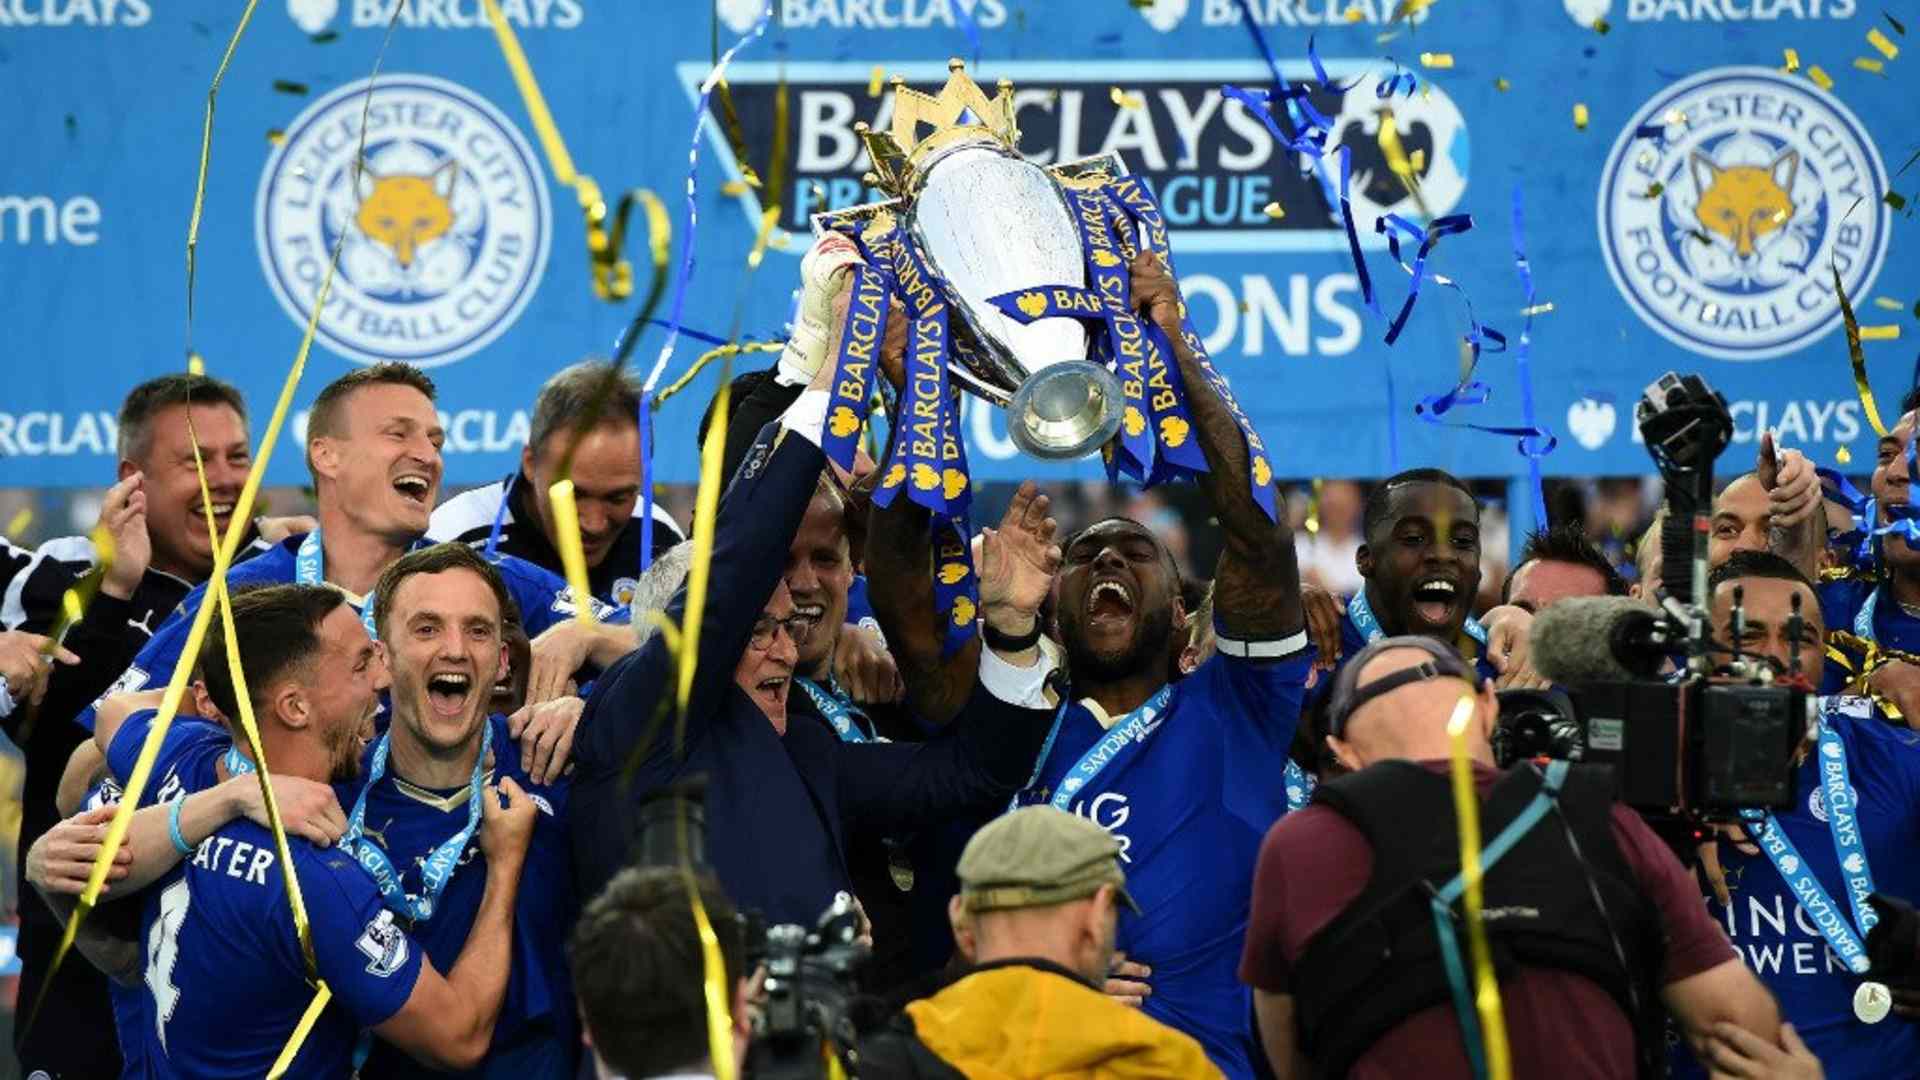 Leicester City celebrate being crowned Premier League champions in 2015/16.